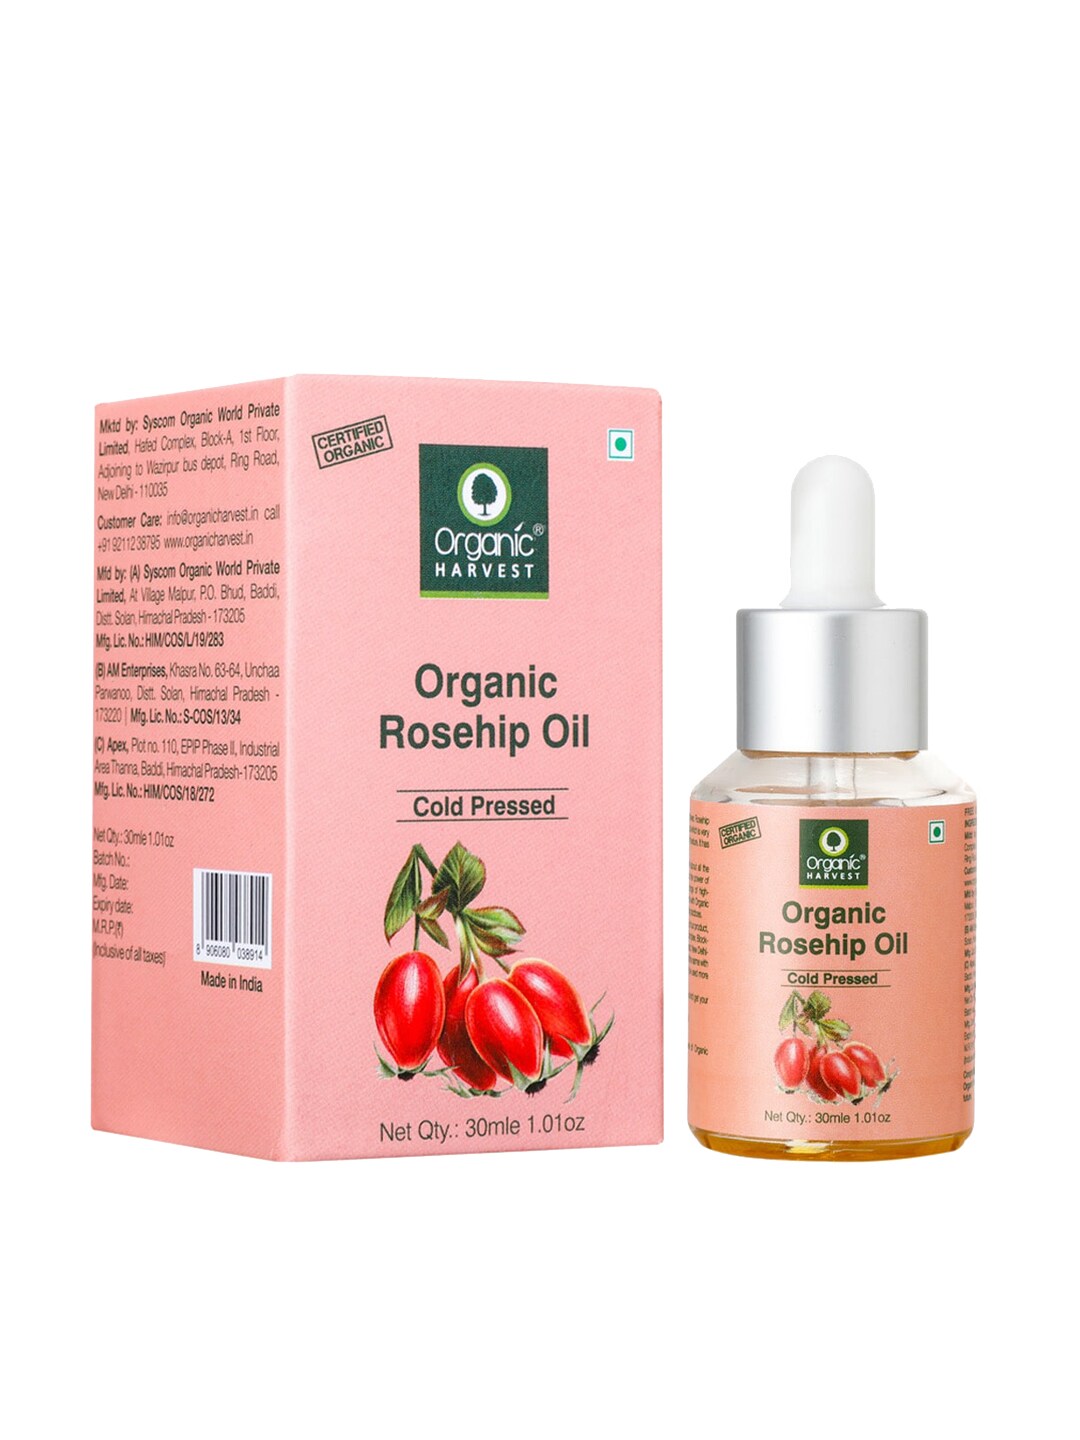 Organic Harvest Cold-Pressed Paraben-Free Rosehip Seed Oil - 30 ml Price in India